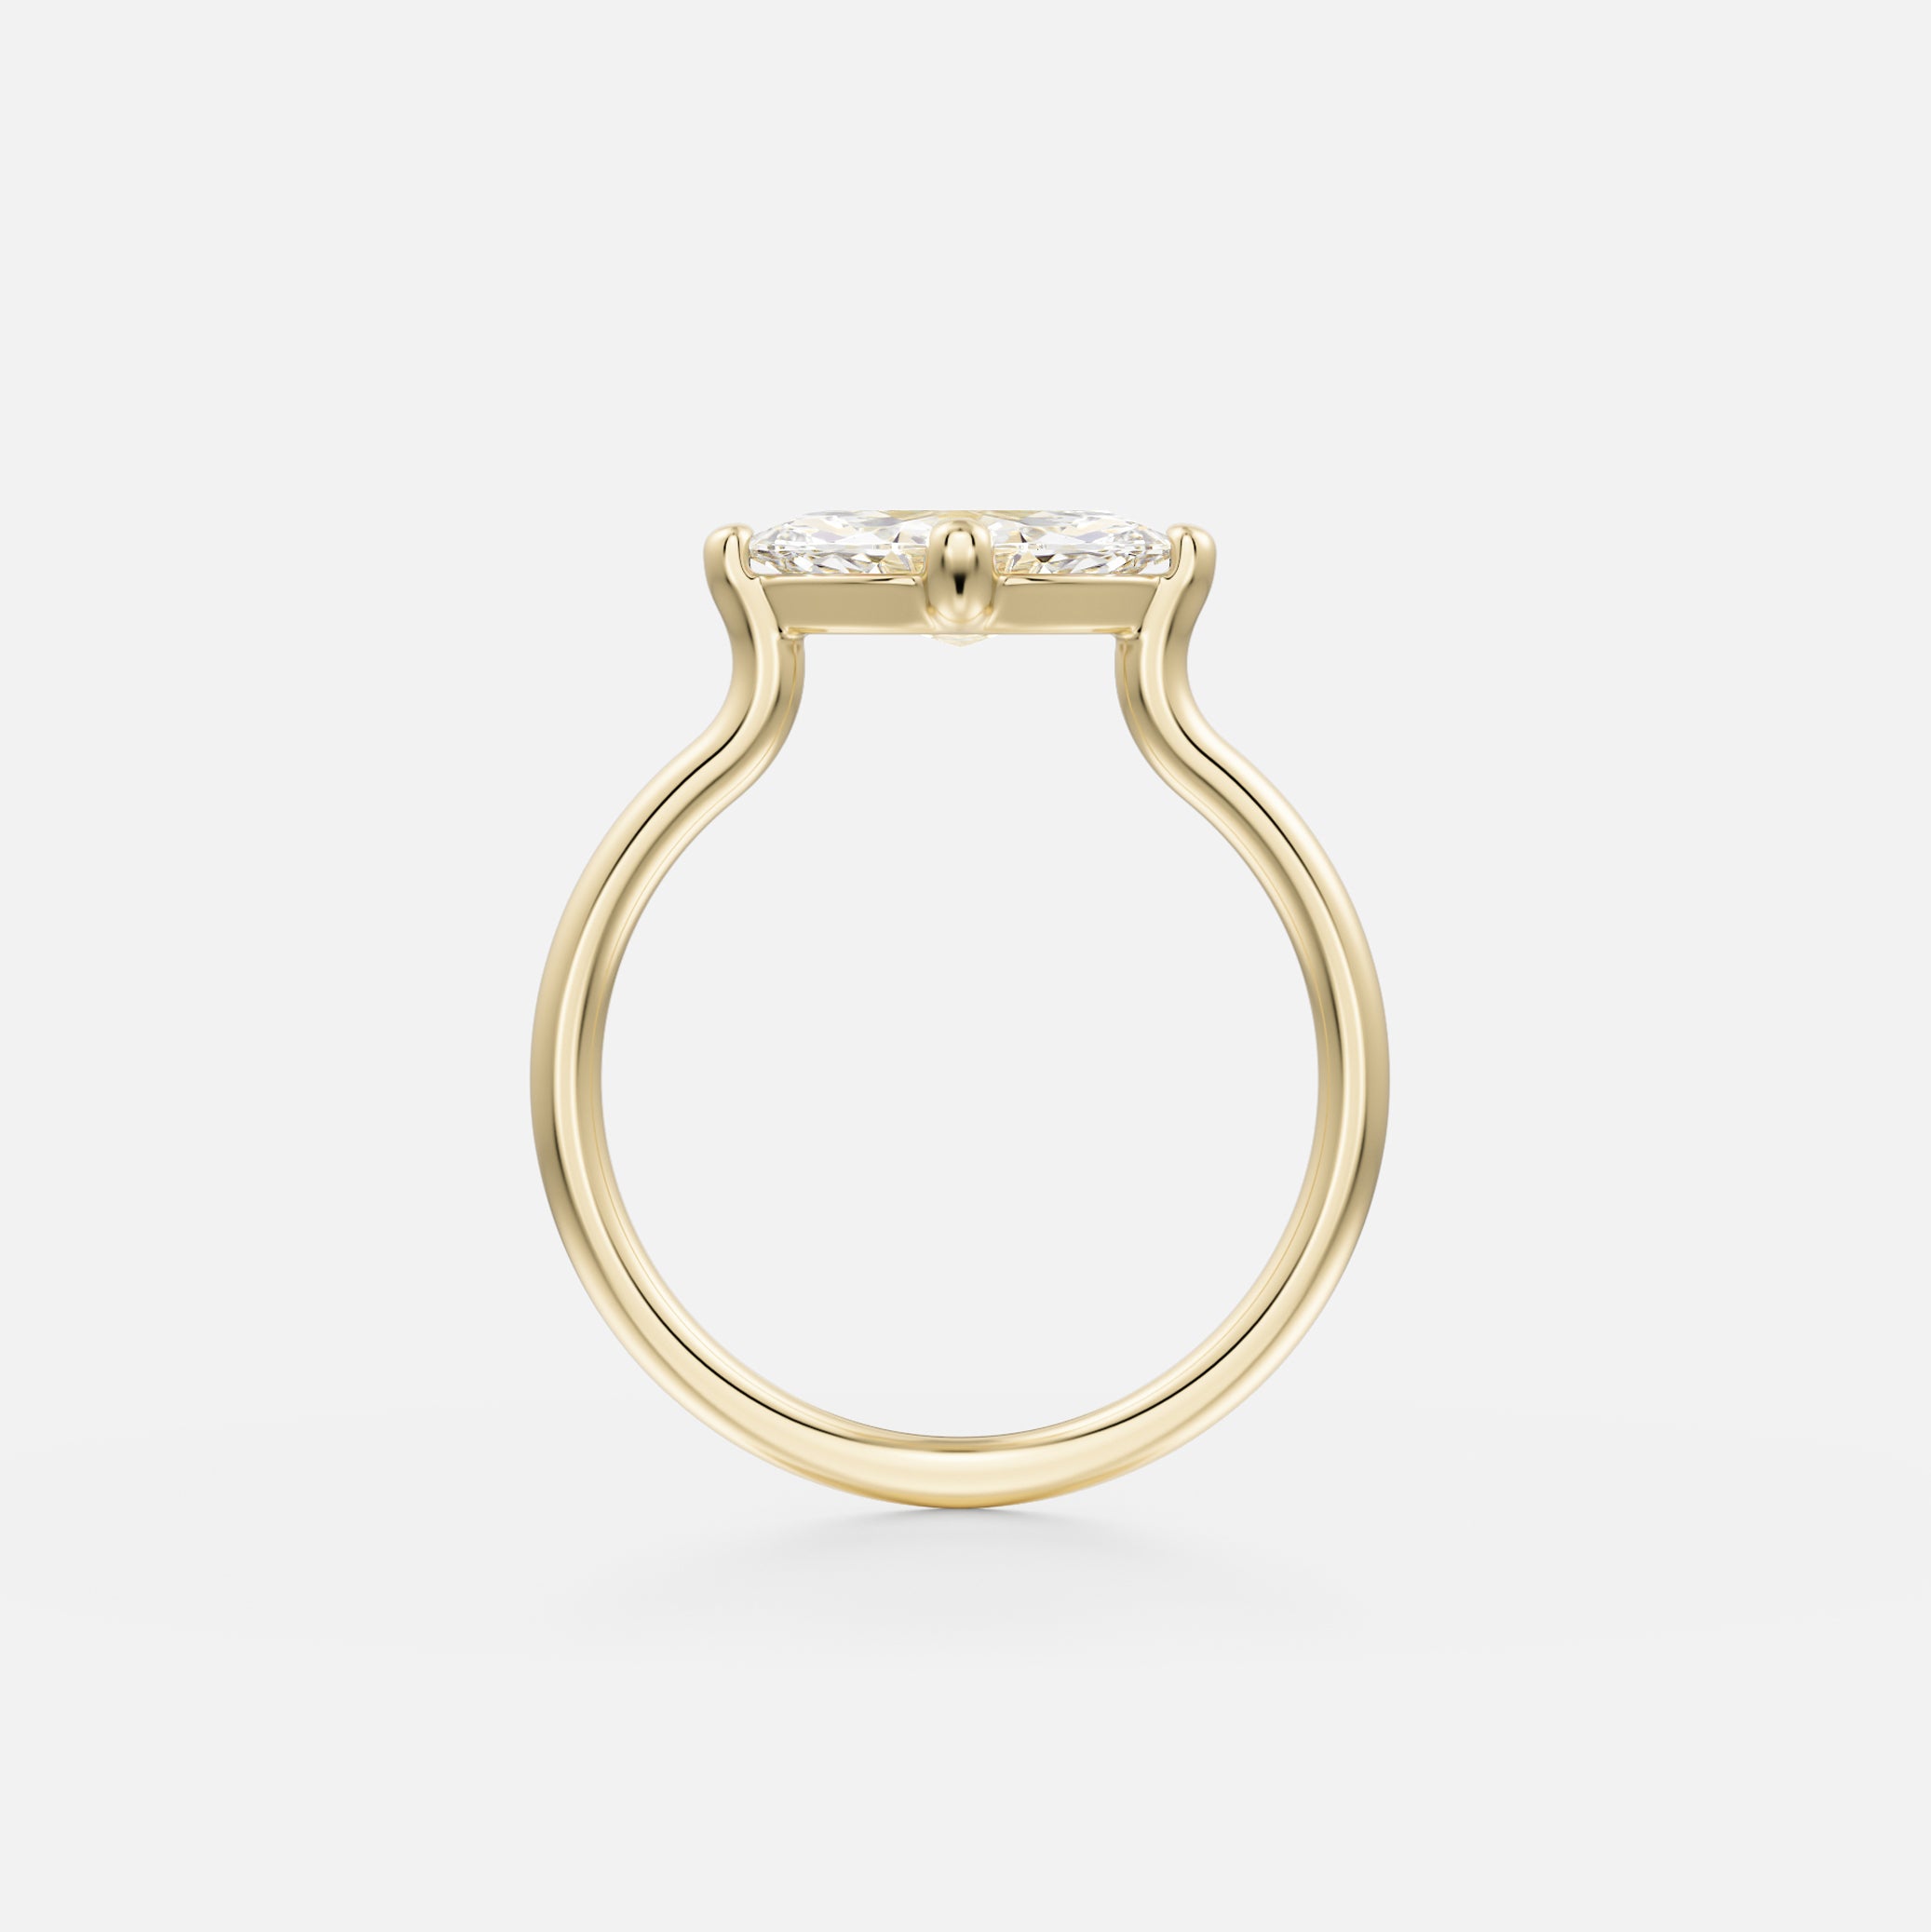 Veli Round Band with East West Marquise Alternative Engagement Ring Setting in recycled 14 karat Gold or platinum handmade by SHW Fine Jewelry NYC